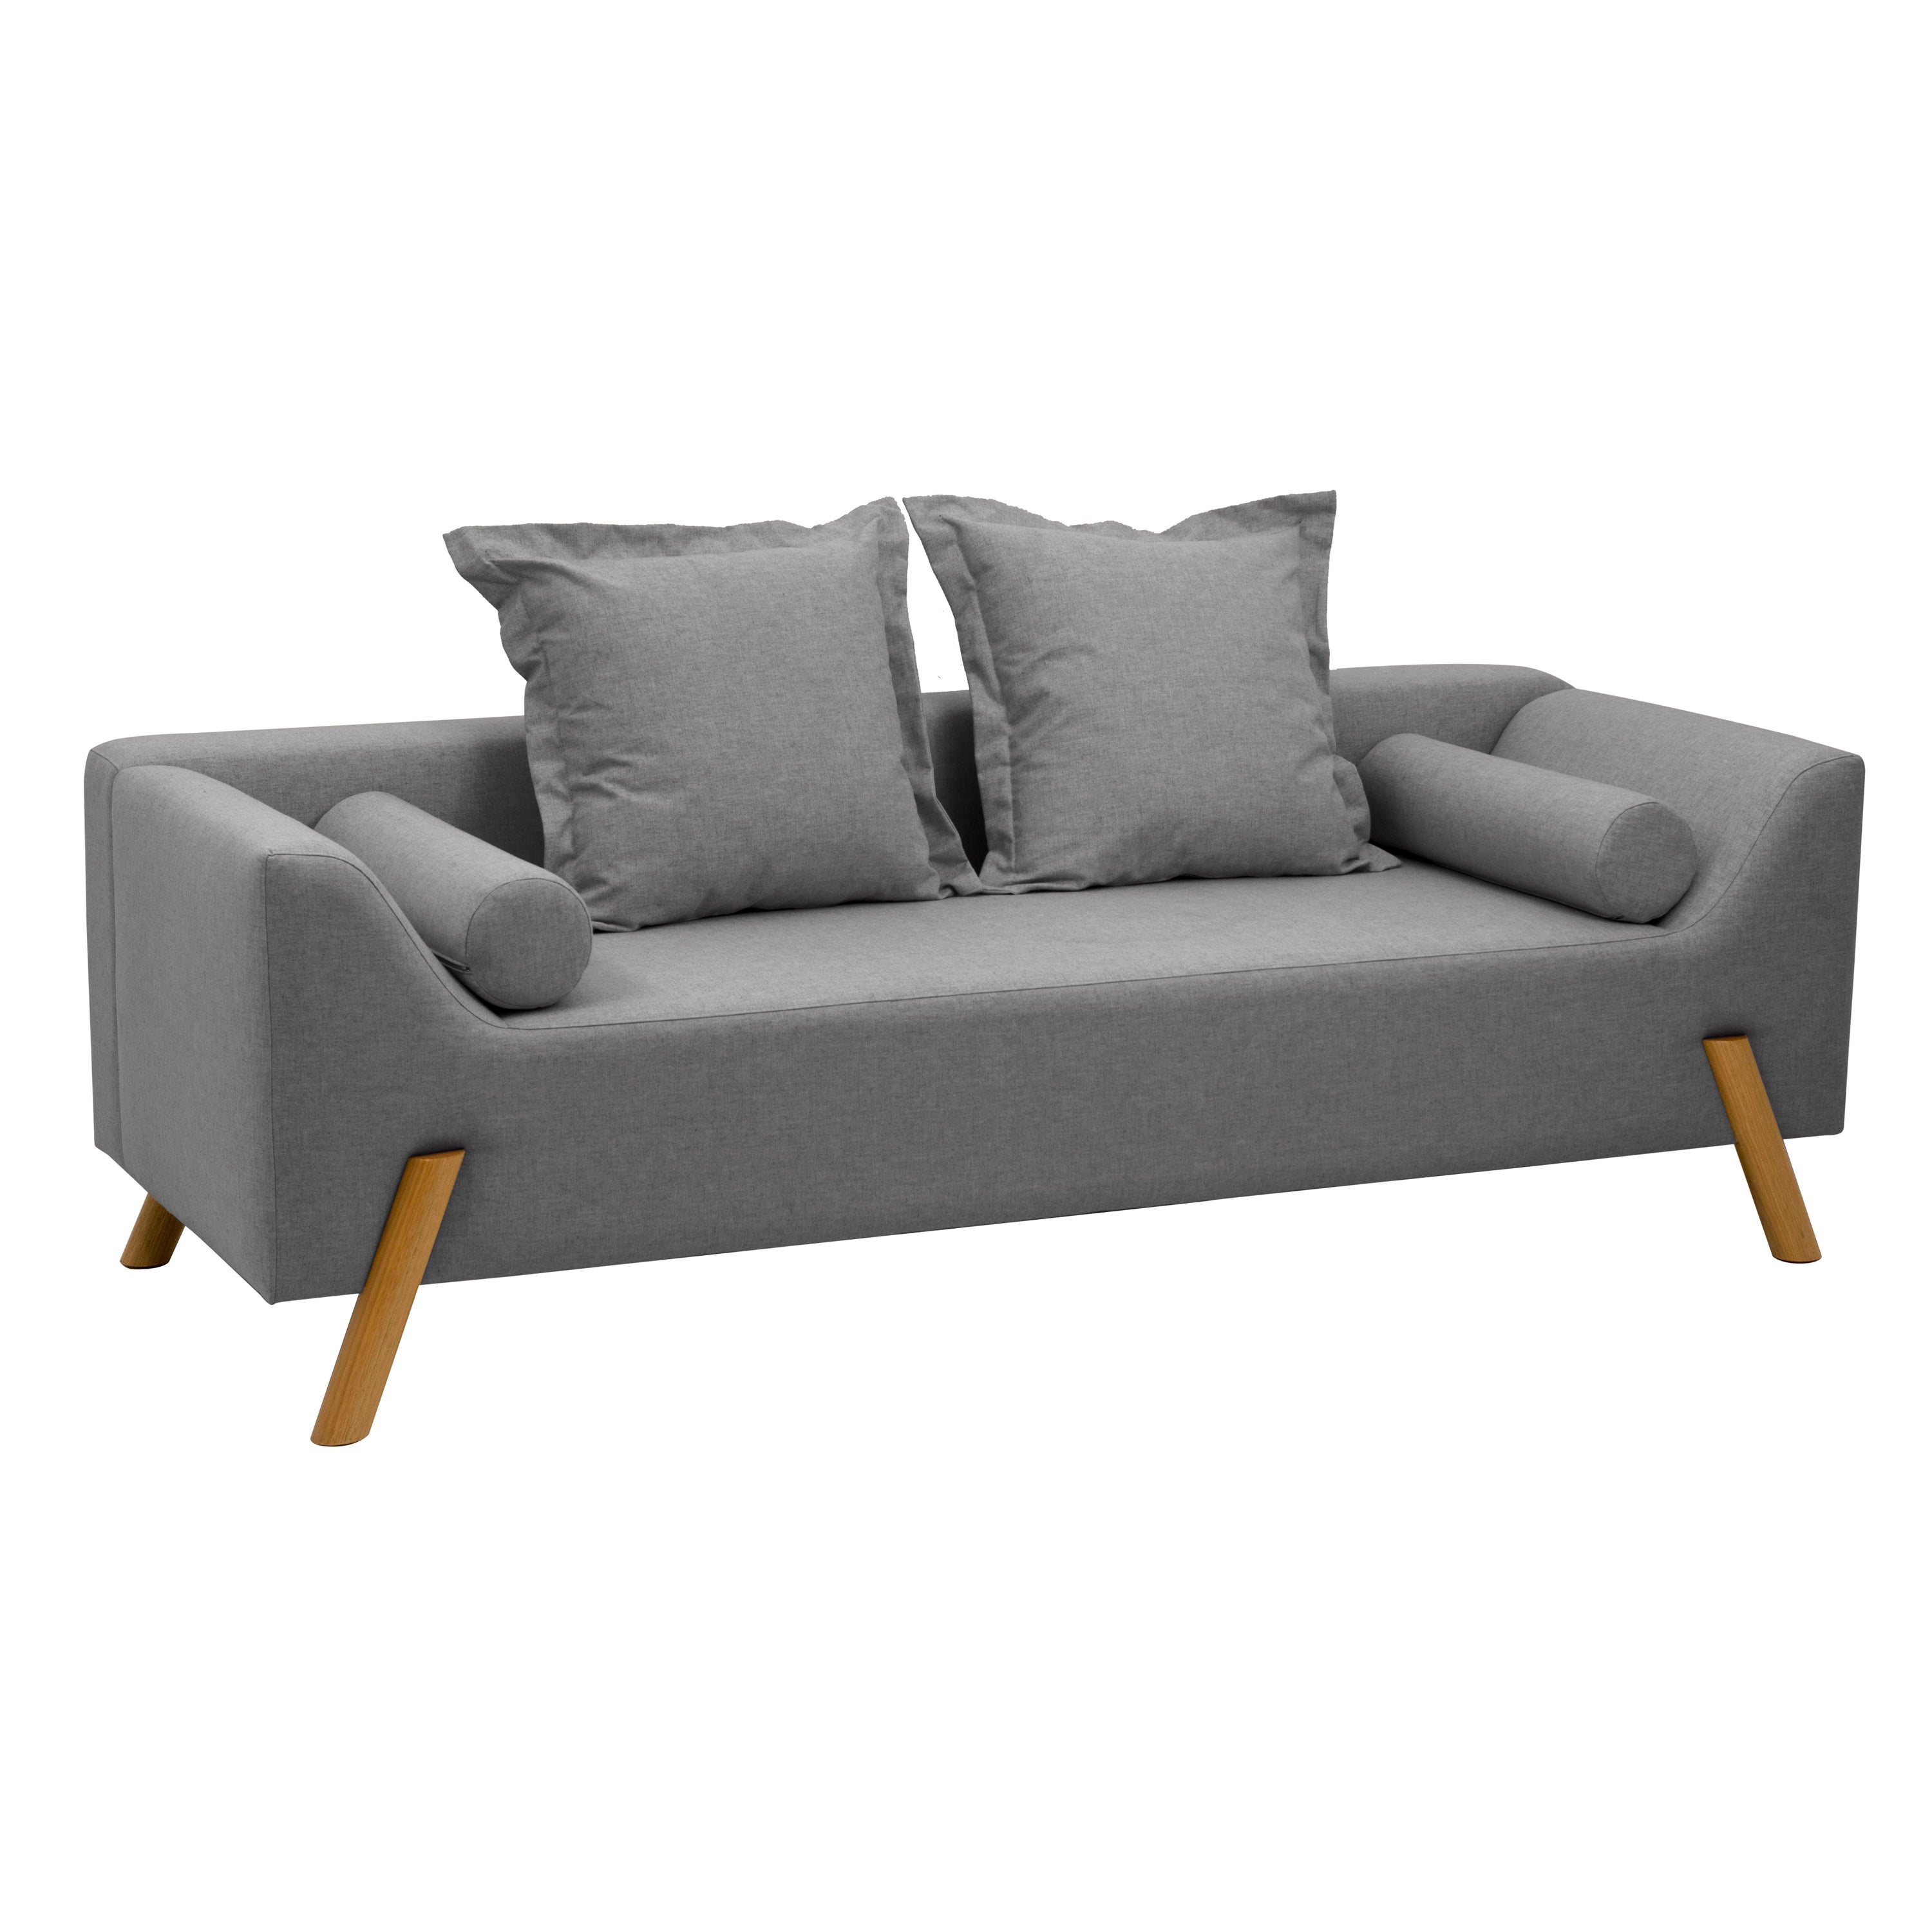 "Flag" Couch in Dark Grey Linen and Wood Feet For Sale